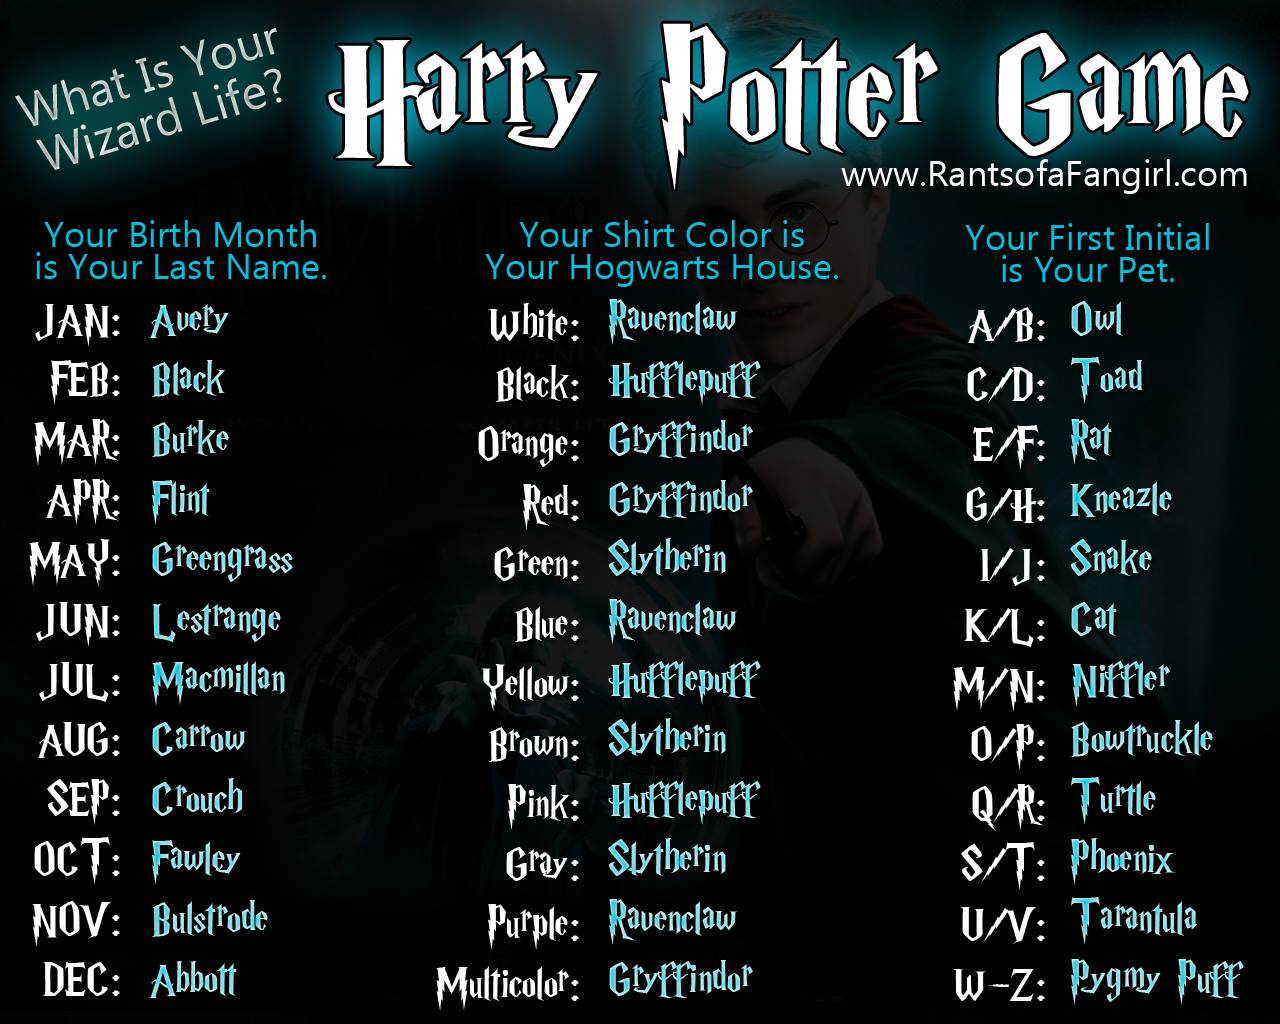 Harry Potter: What is your wizard life?